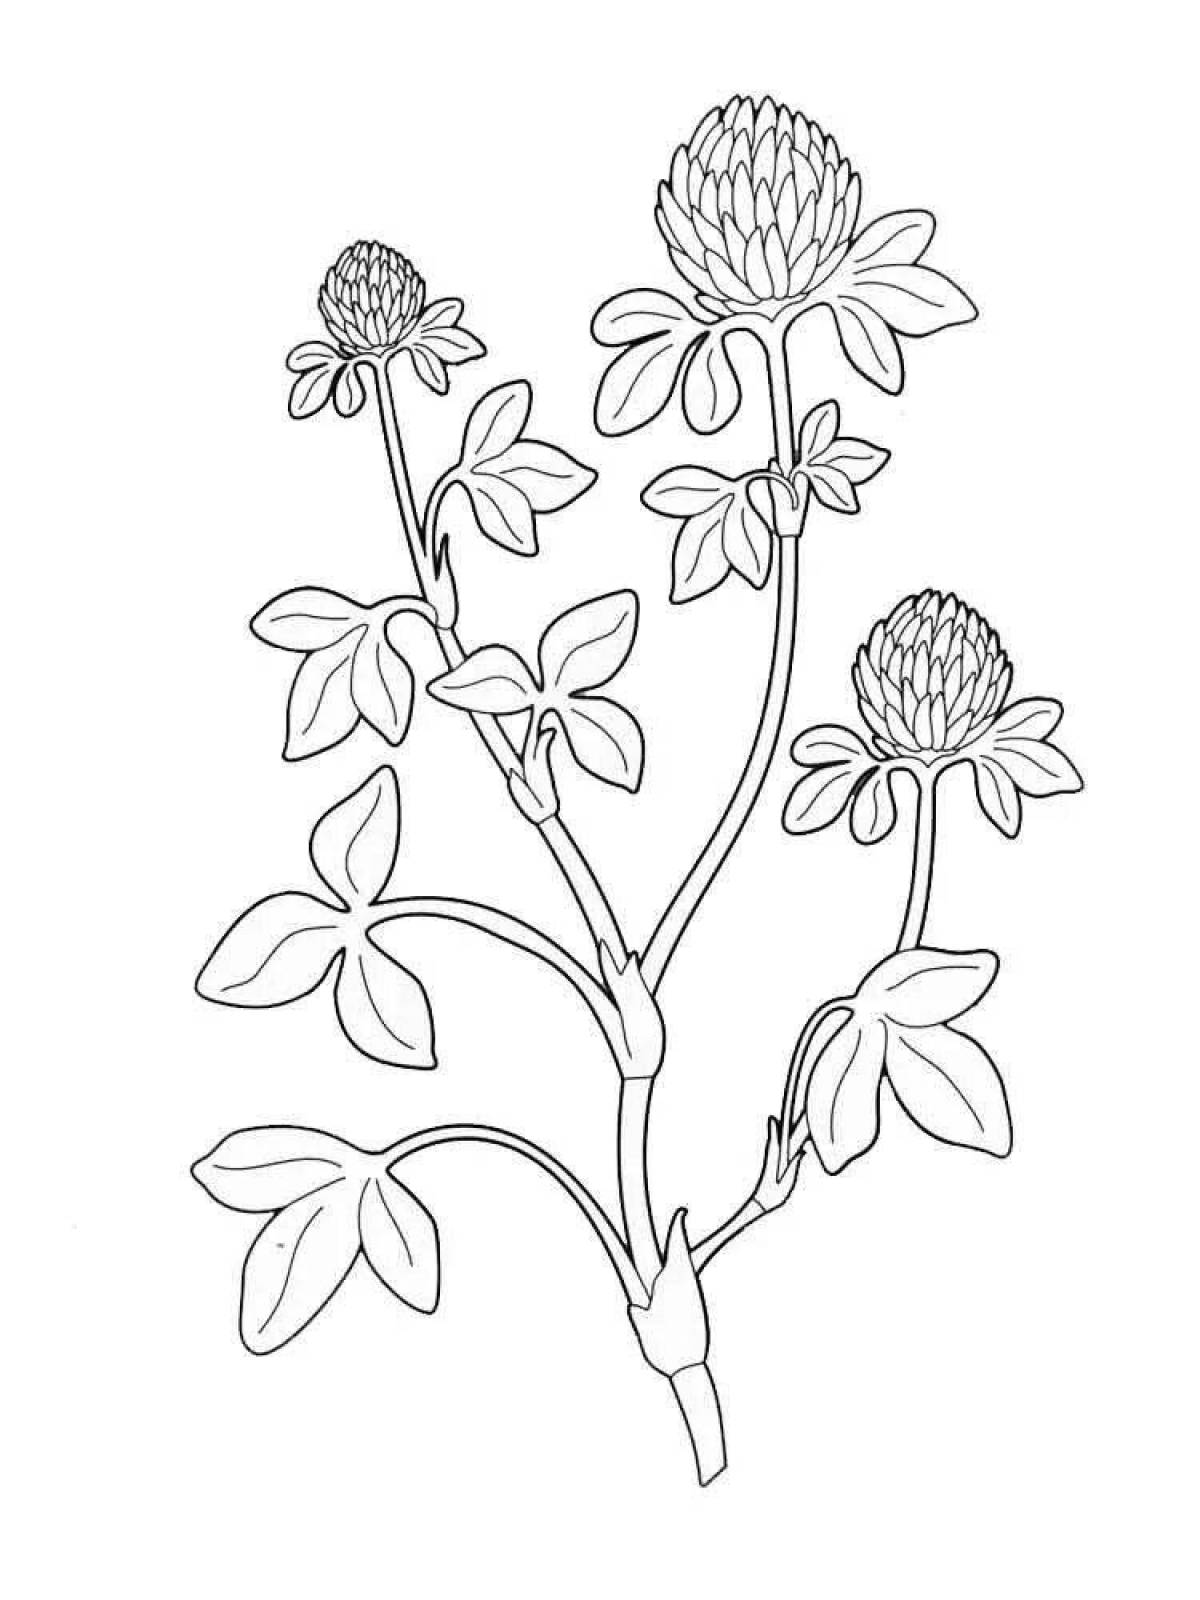 Coloring page funny plant for kids